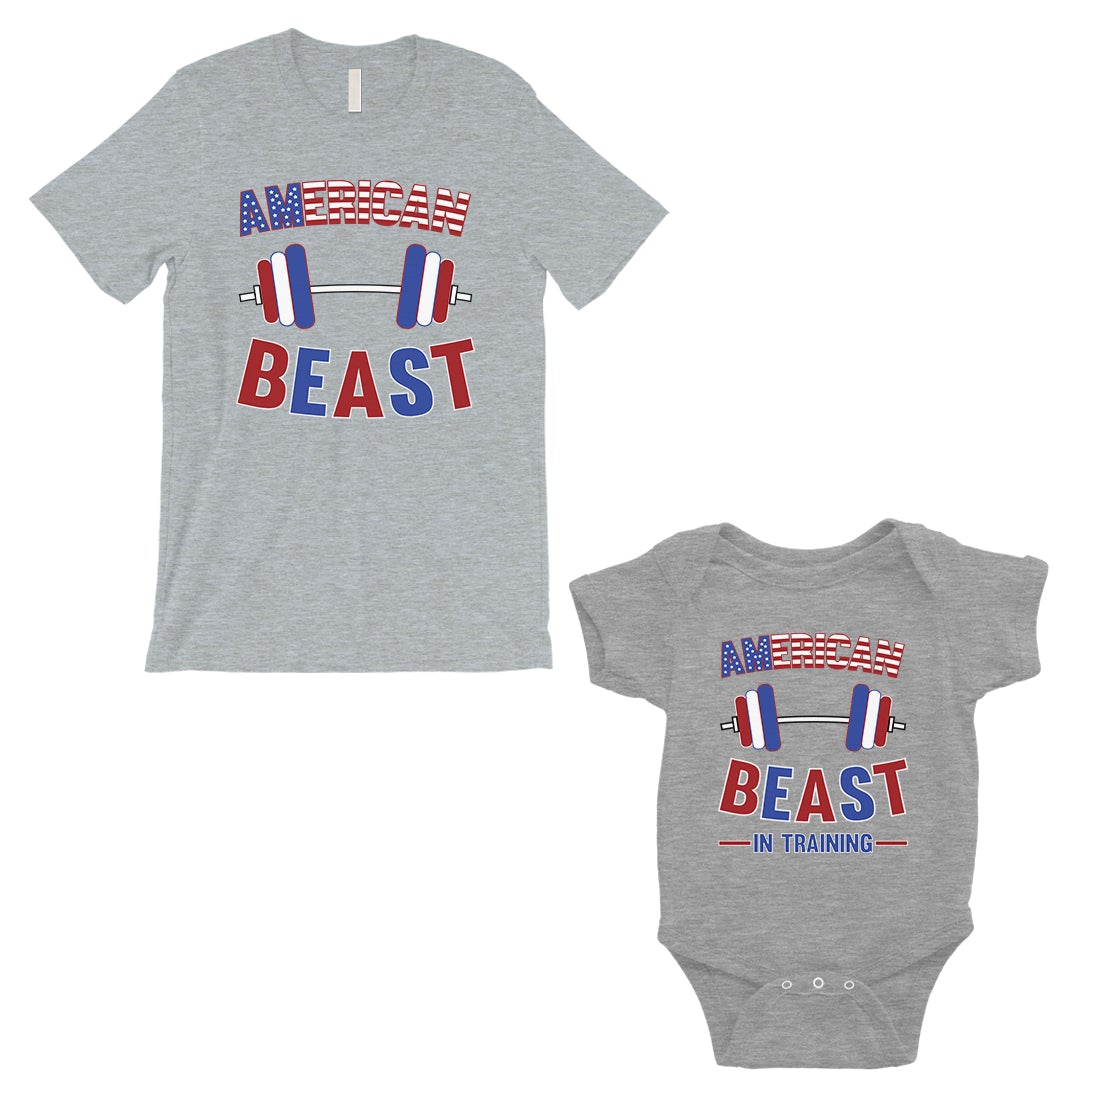 American Beast Training Dad and Baby Matching Outfits Gray